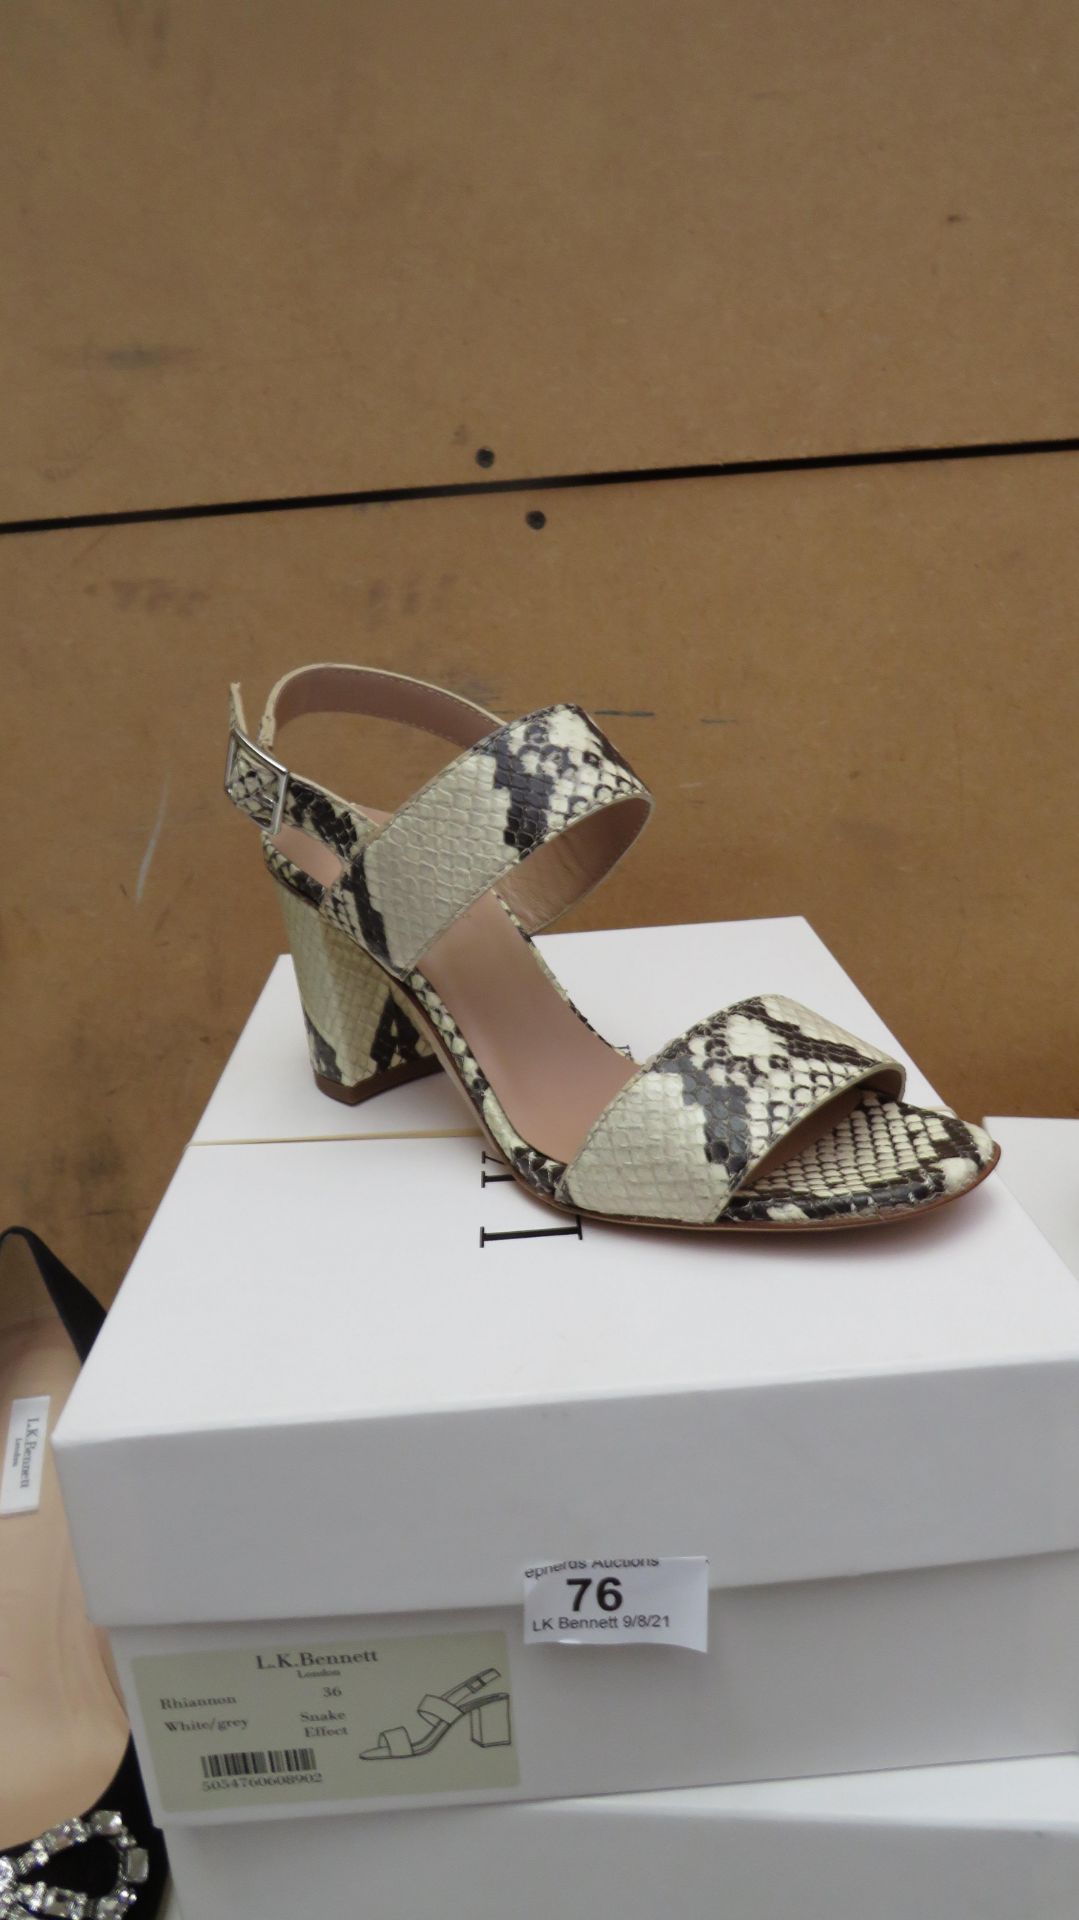 L K Bennett London Rhiannon White/Grey Snake Effect Shoes size 41 RRP £225 new & boxed see image for